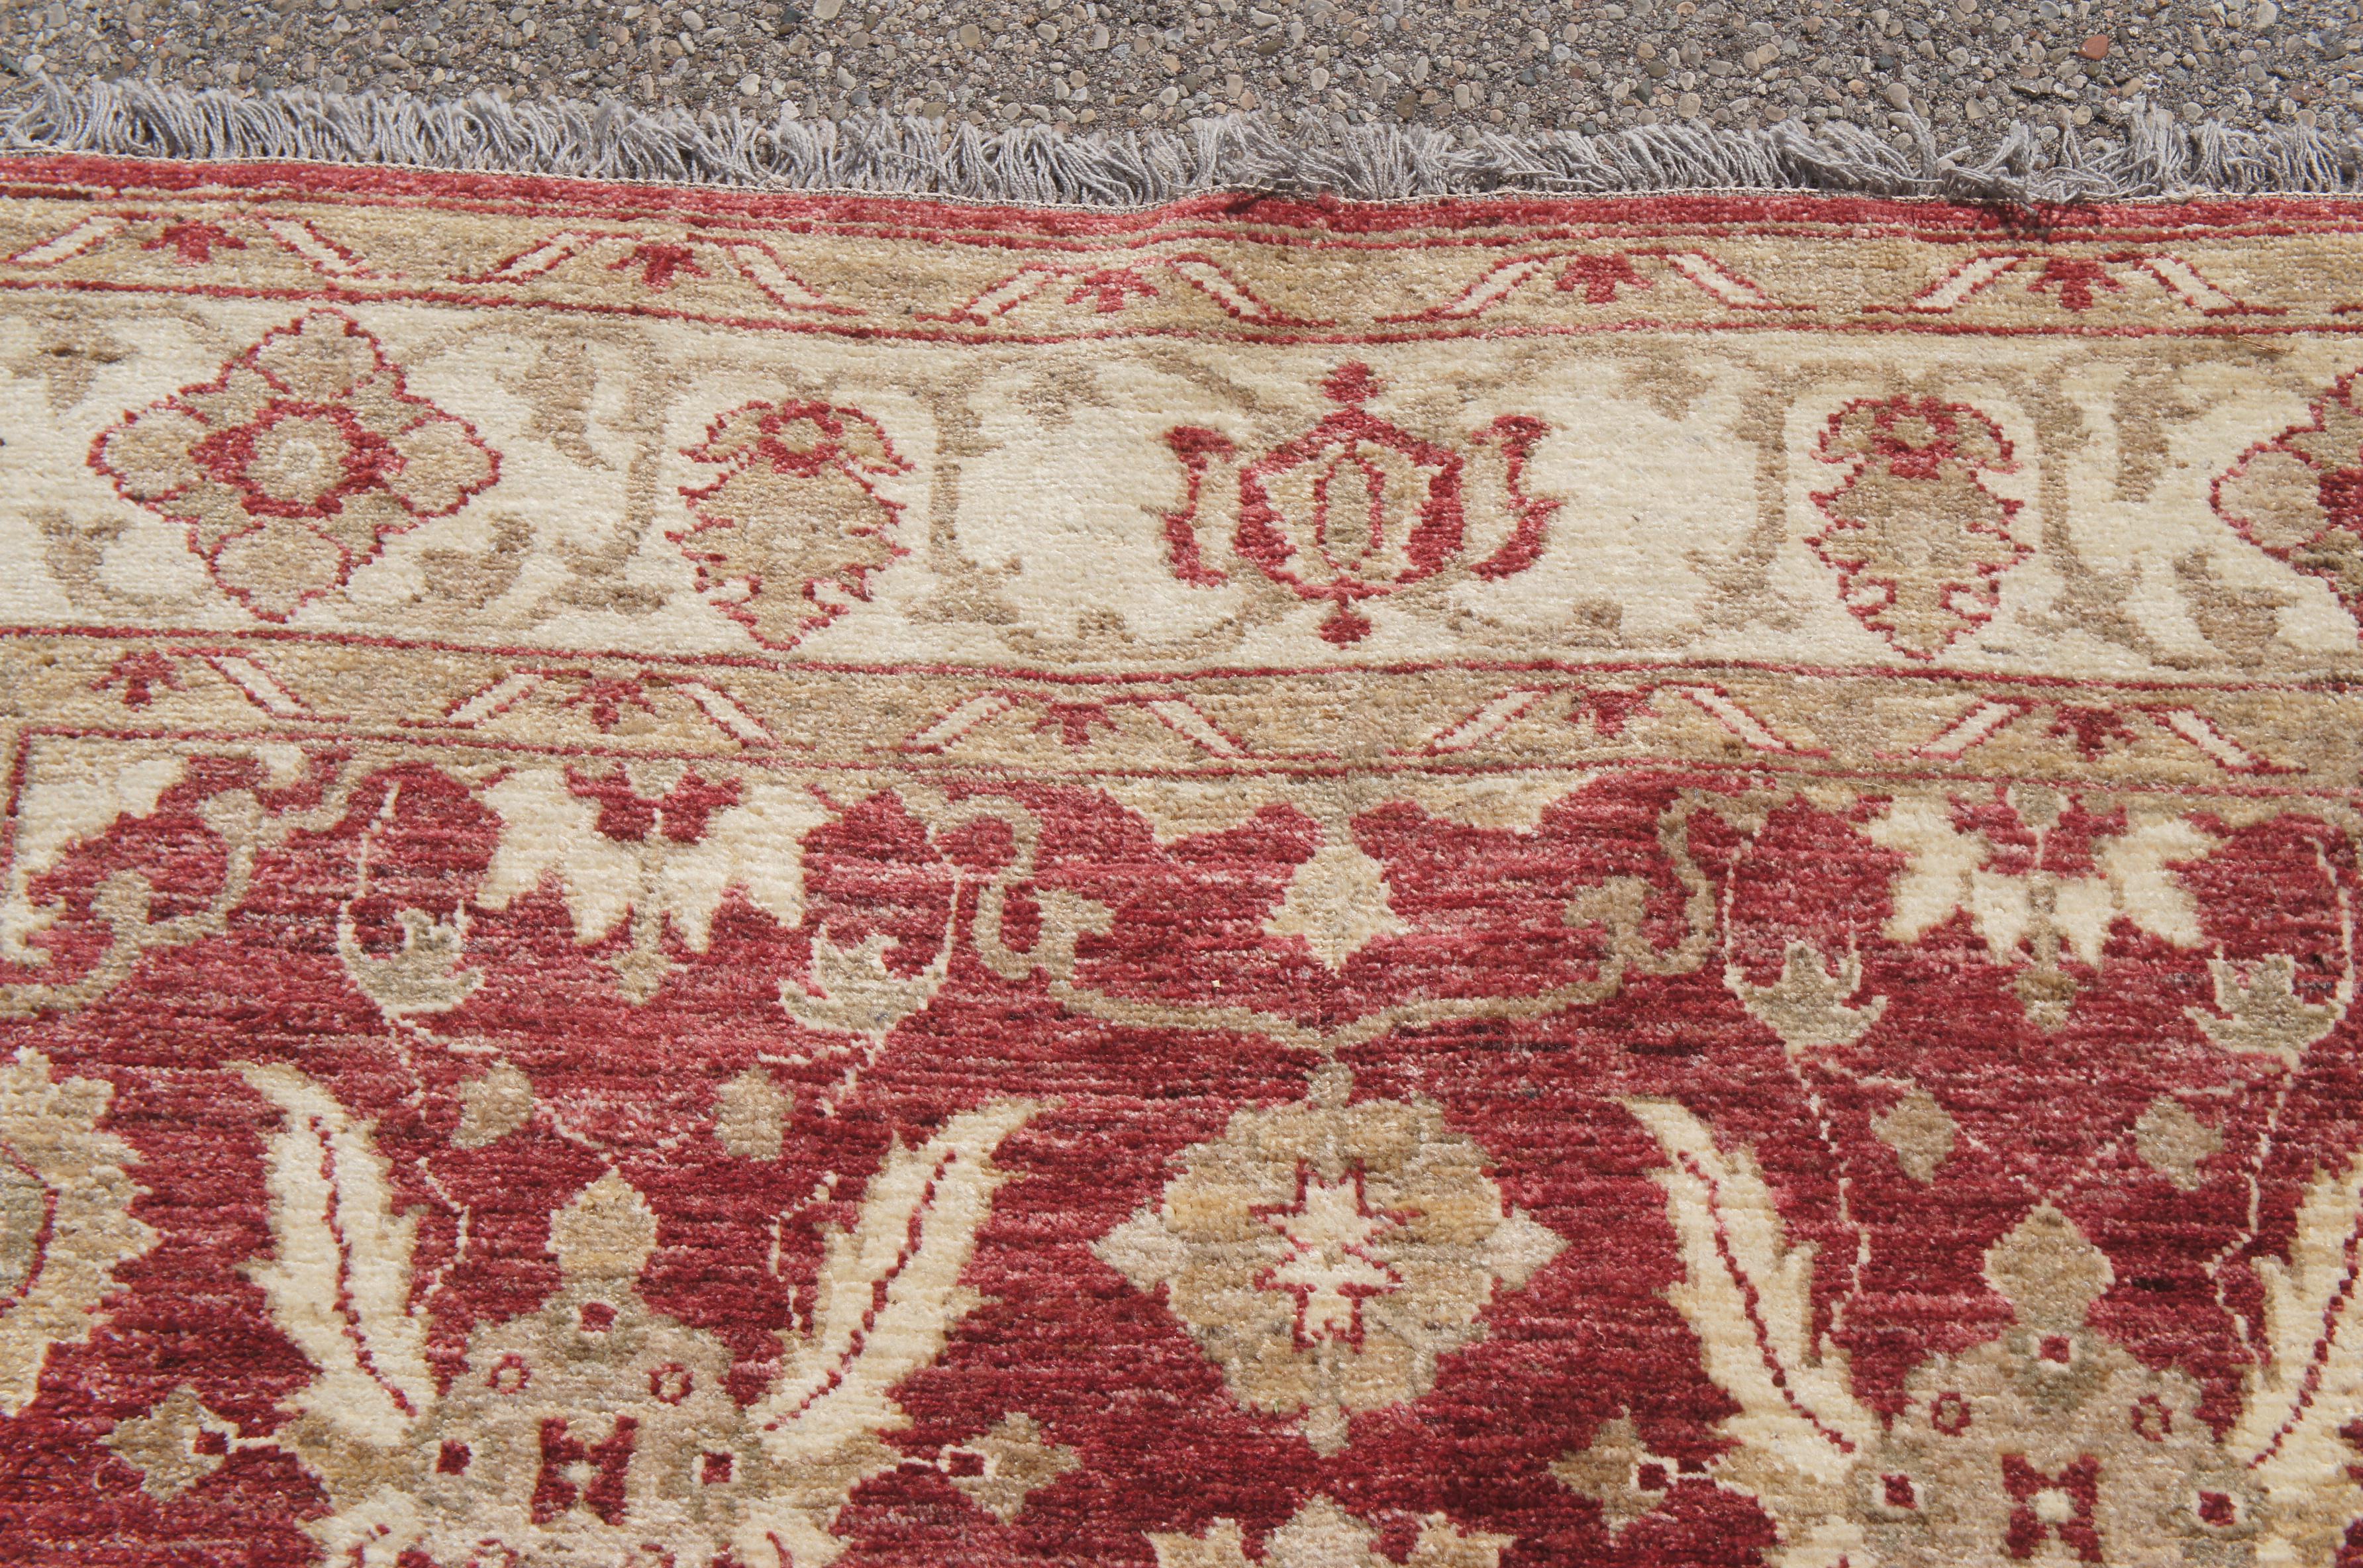 Hand Woven Turkish Red & Beige Geometric Floral Wool Carpet Area Rug 5' x 7' For Sale 4